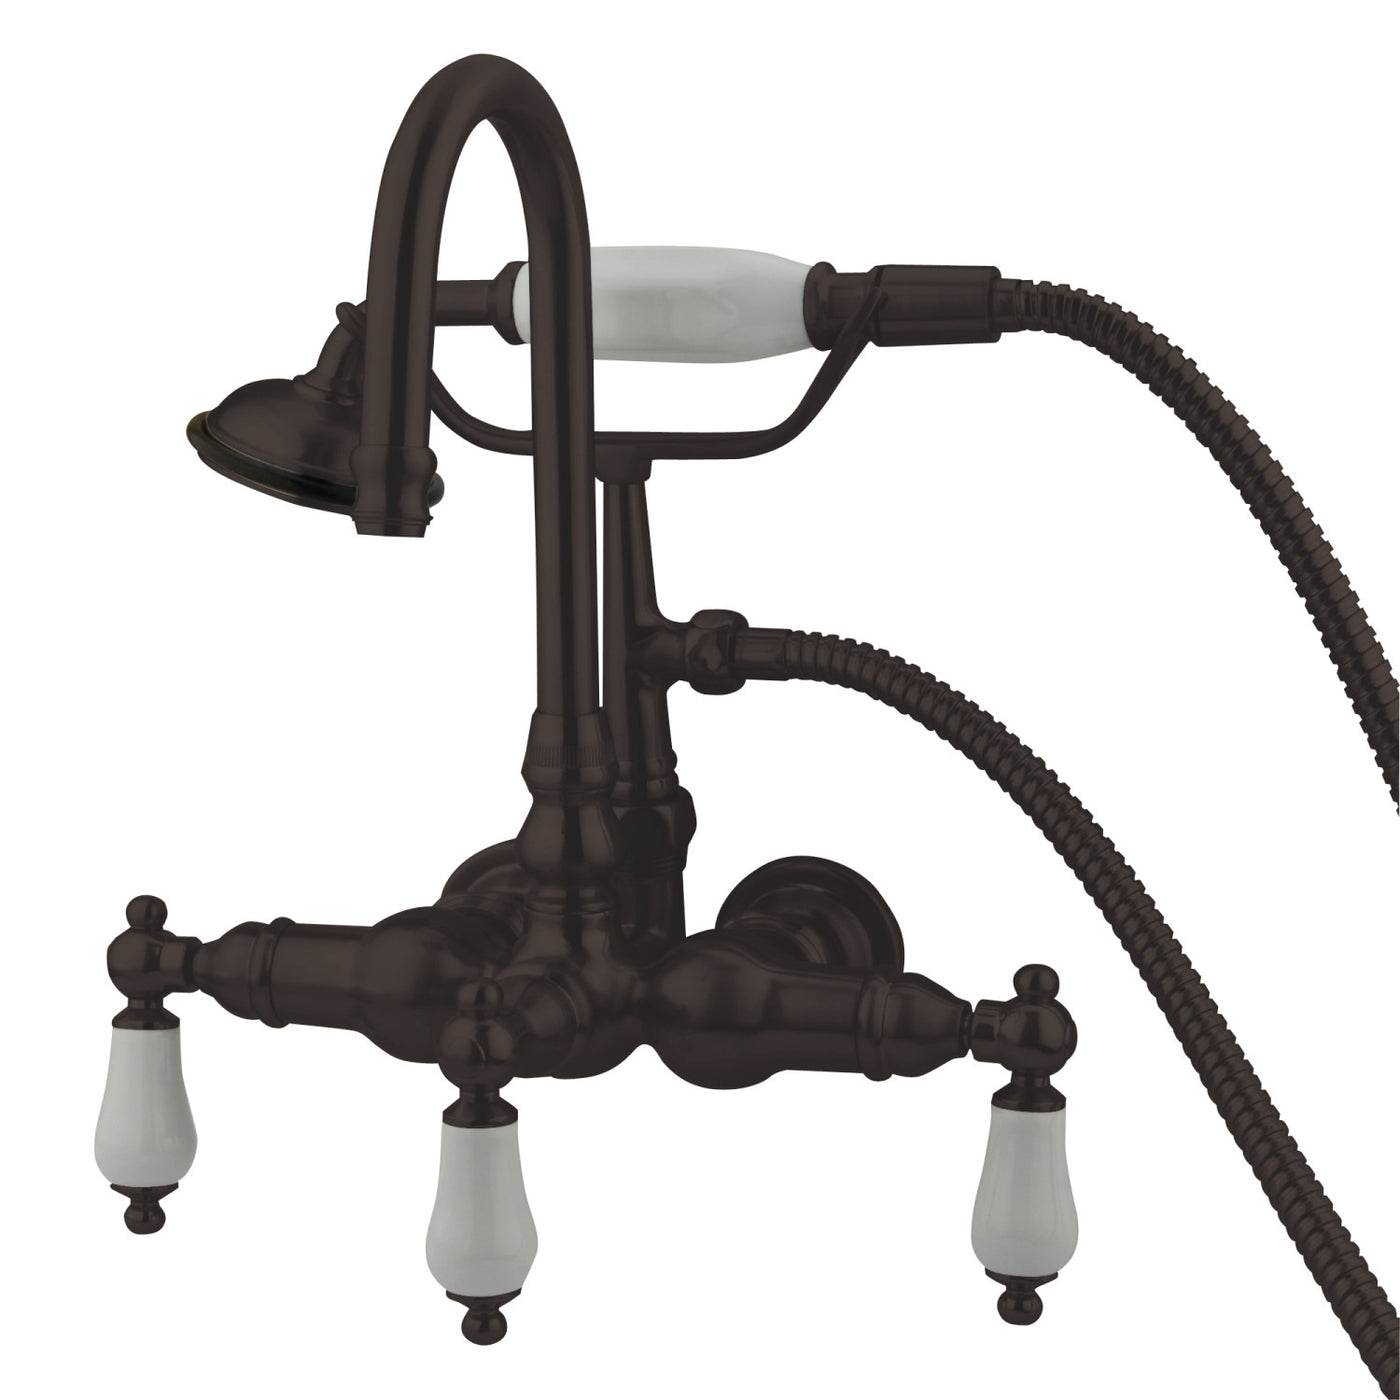 Elements of Design DT0075PL 3-3/8" Wall Mount Tub Faucet with Hand Shower, Oil Rubbed Bronze